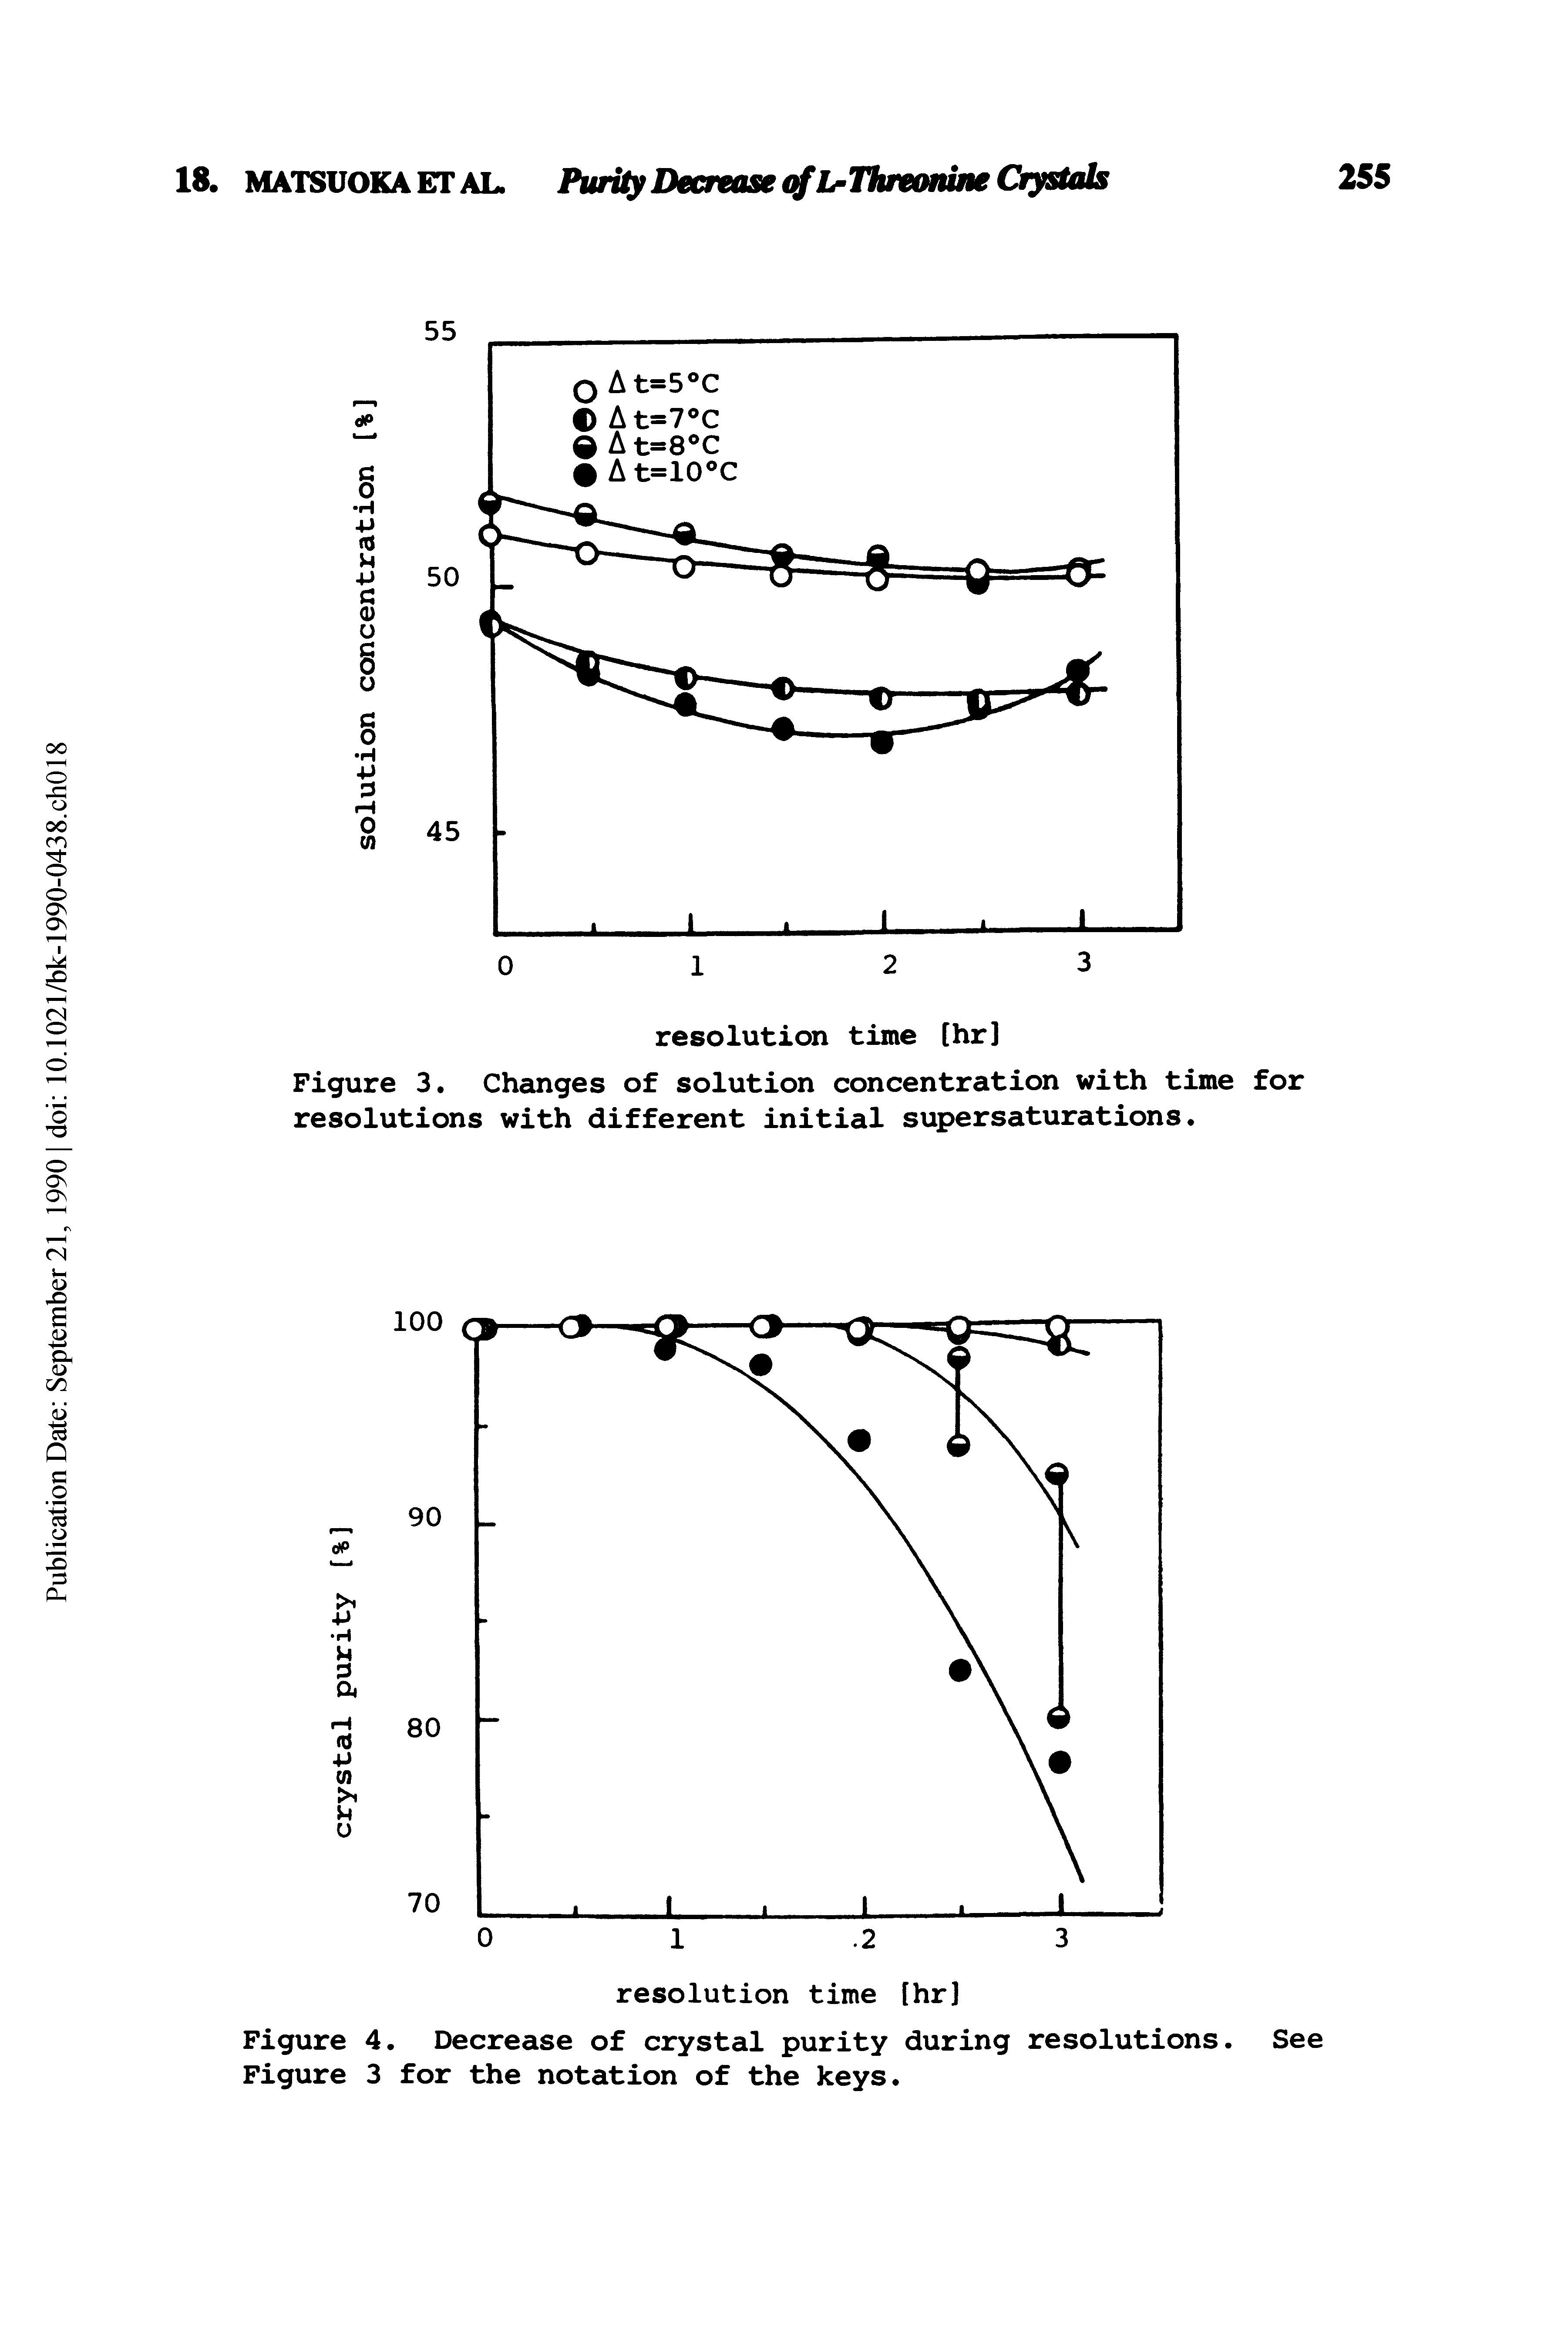 Figure 4. Decrease of crystal purity during resolutions. Figure 3 for the notation of the keys.